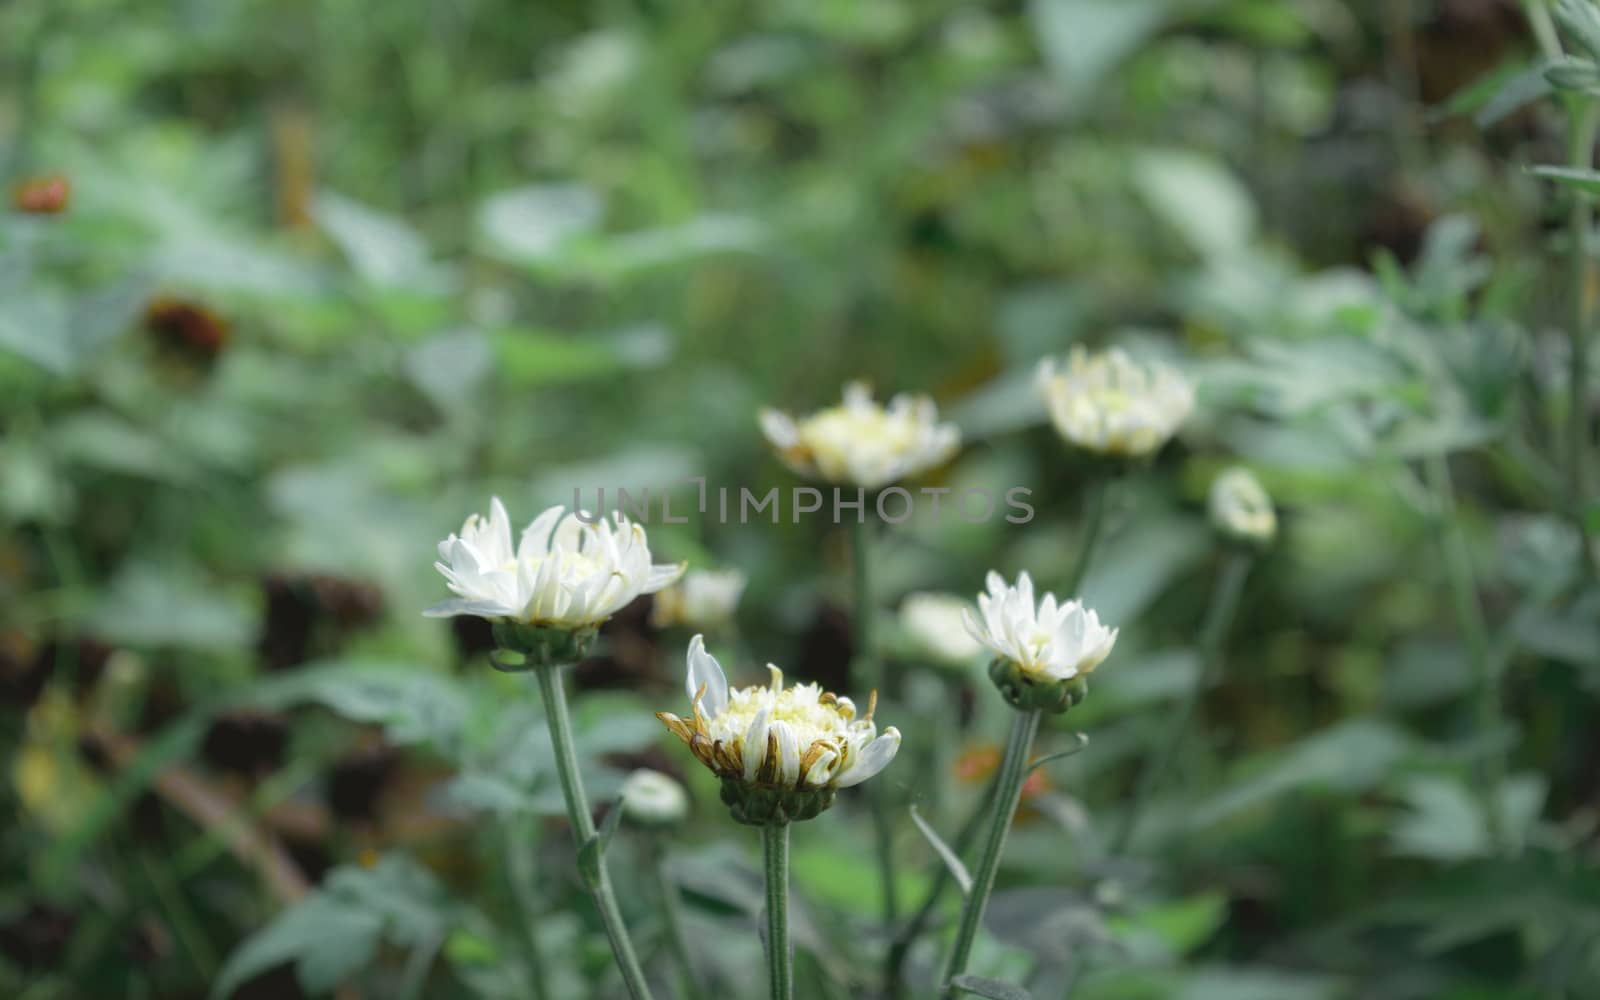 Closeup beautiful small cute flower of yellow pollen and white petal of Common Daisy, Lawn Daisy, Bellis Perennis, Woundwort, Bruisewort or English Daisy variegated foliage spot in rural environment. Shibpur Howrah botanical garden West Bengal India South Asia Pacific. by sudiptabhowmick